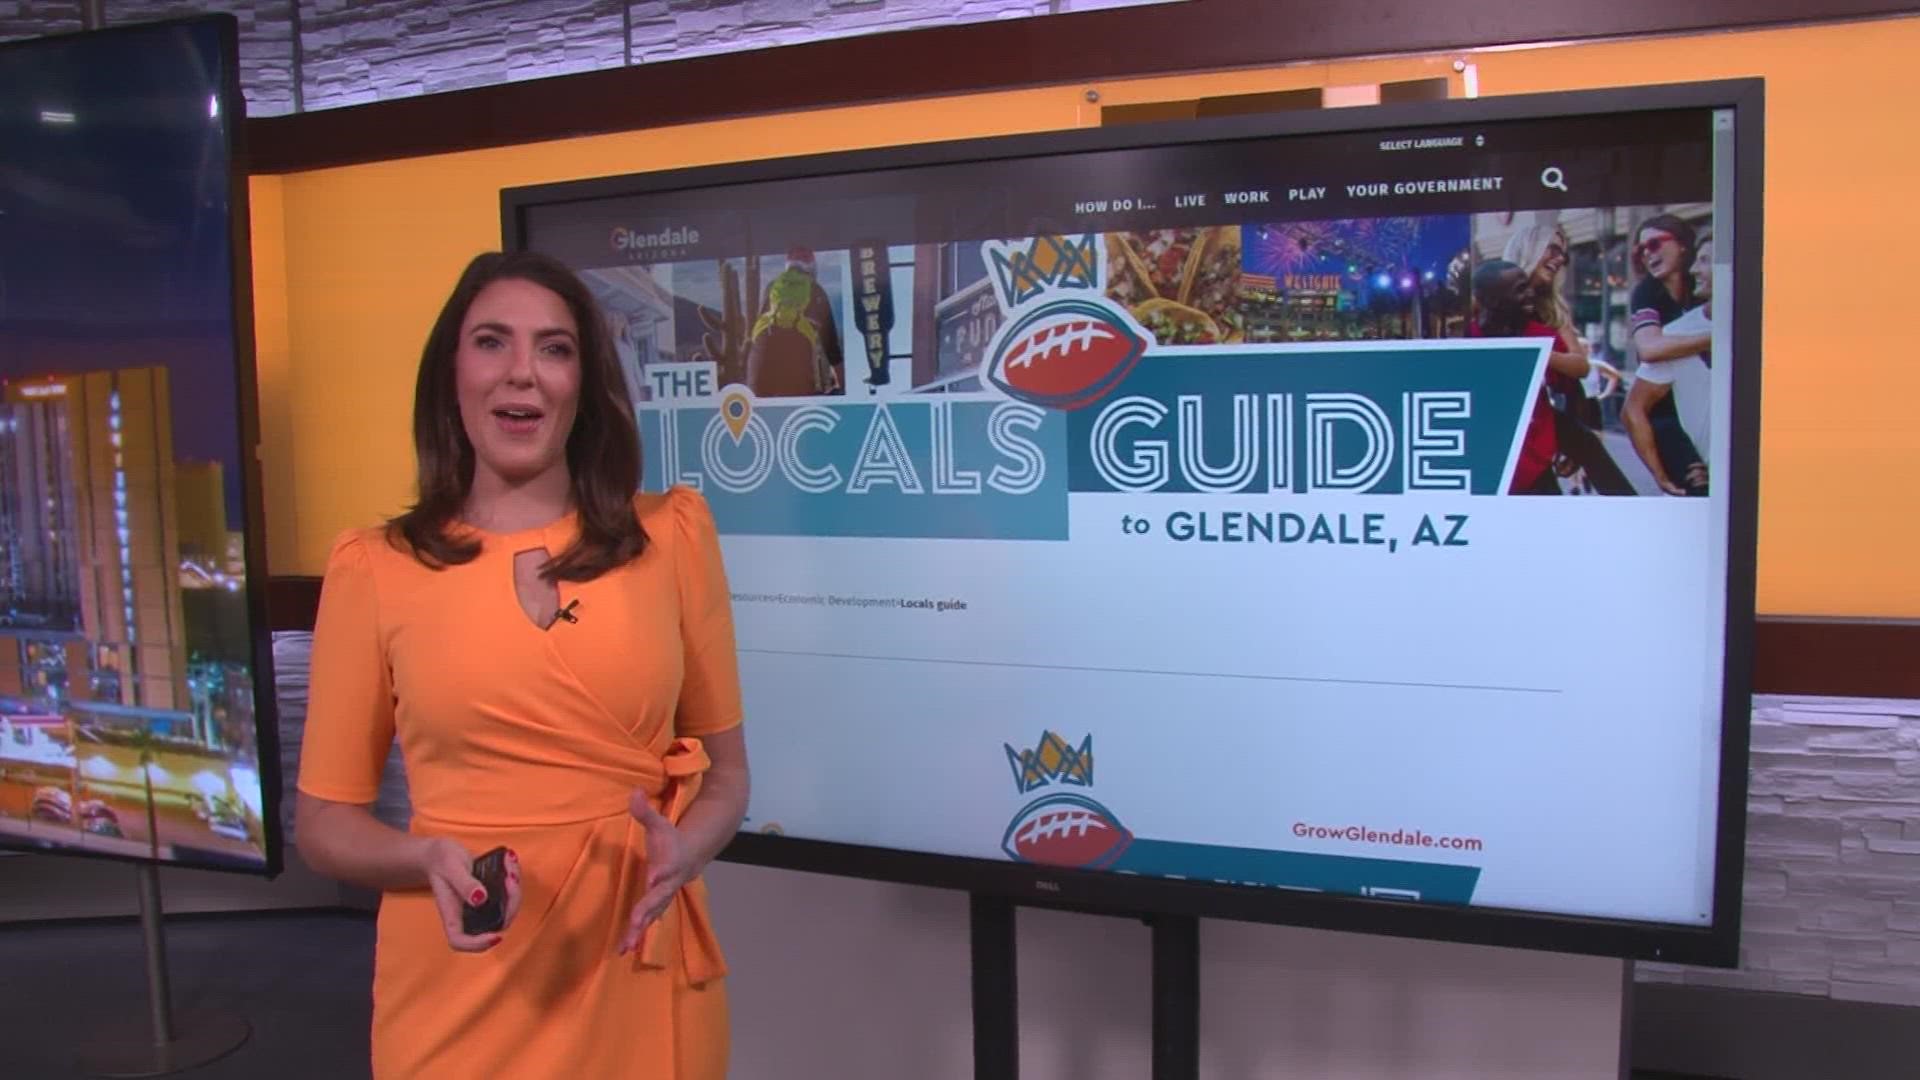 On the search for things to do in the West Valley? Take a look at the "Locals Guide" of Glendale, Arizona.